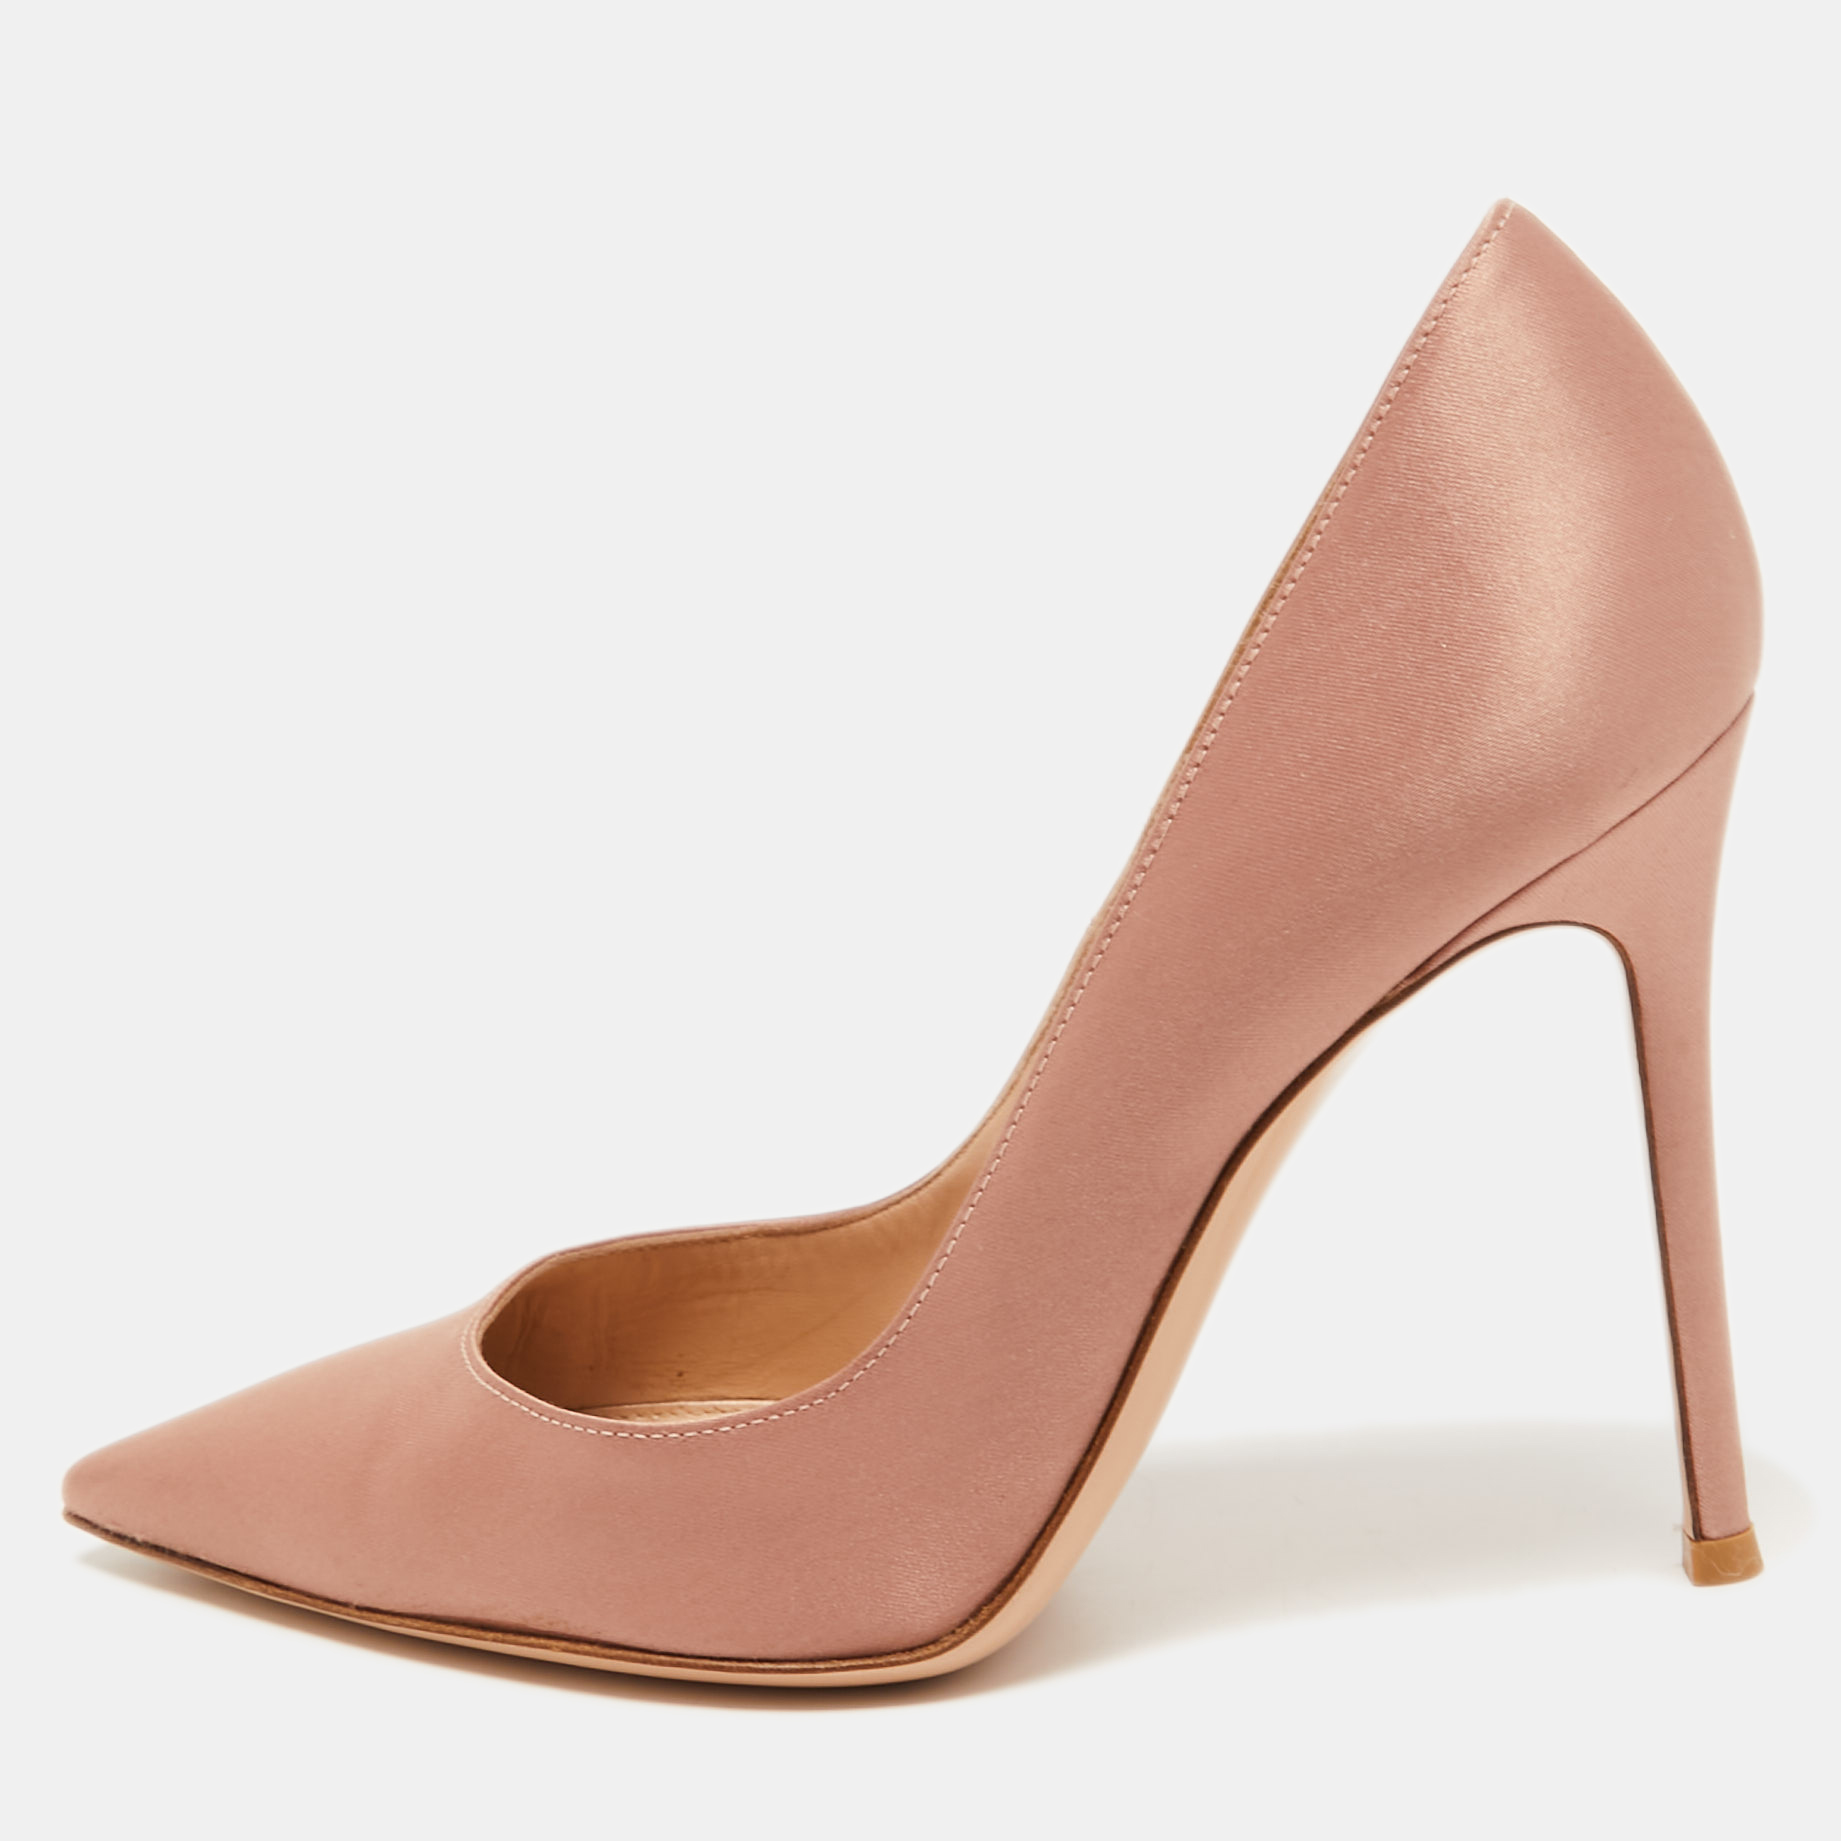 Pre-owned Gianvito Rossi Pink Satin Pointed Toe Pumps Size 38